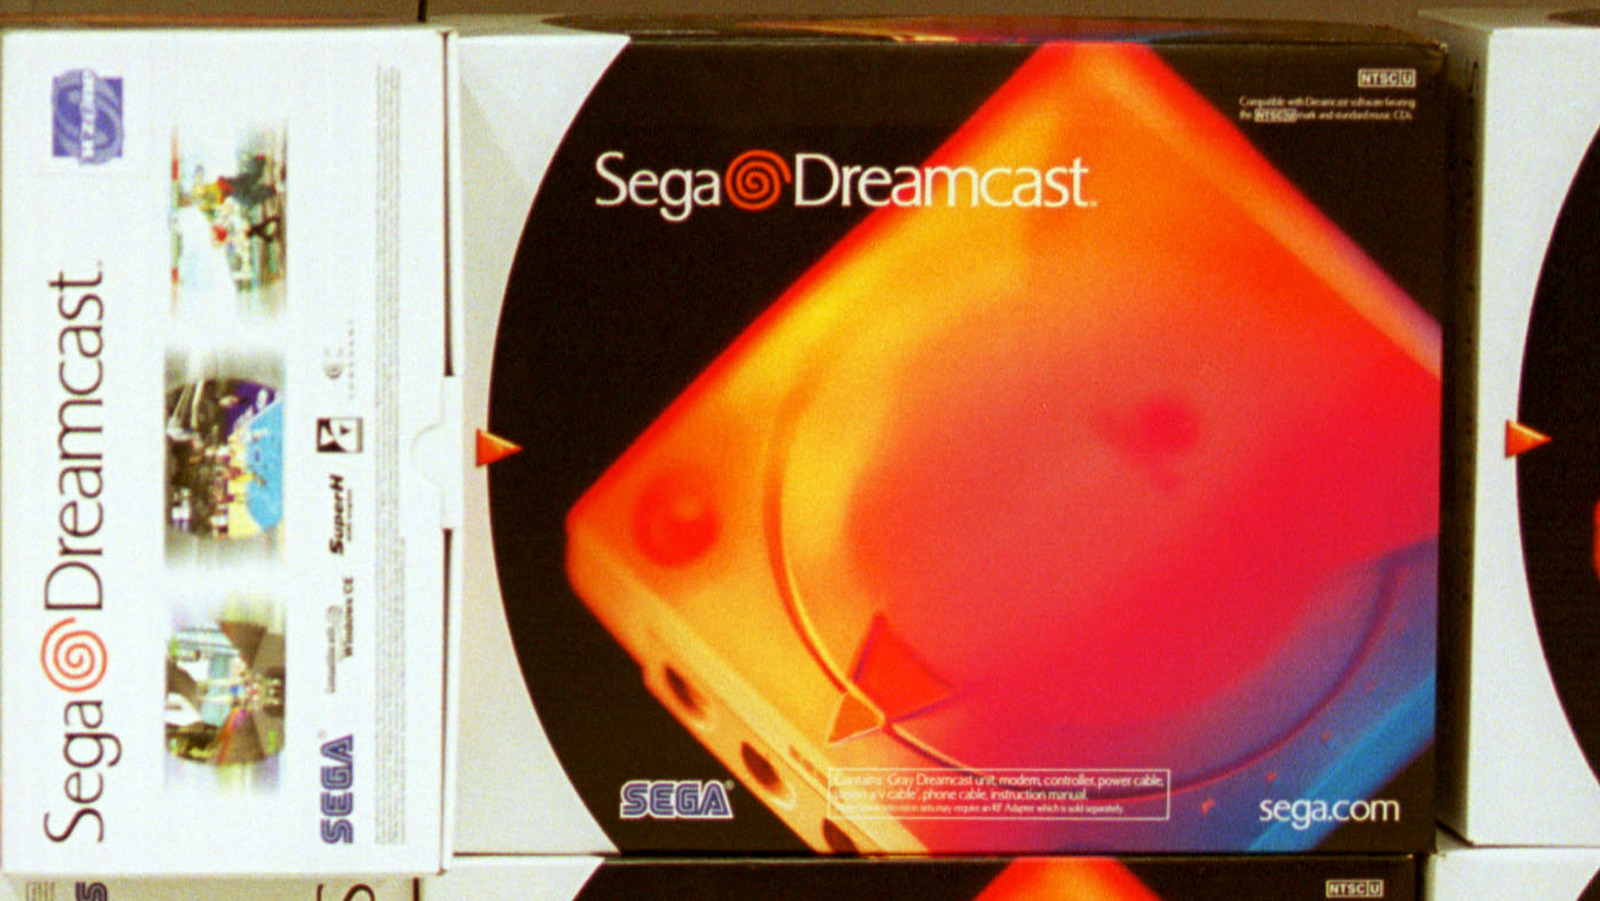 Sega Was Ahead Of Its Time With The Dreamcast And It Backfired